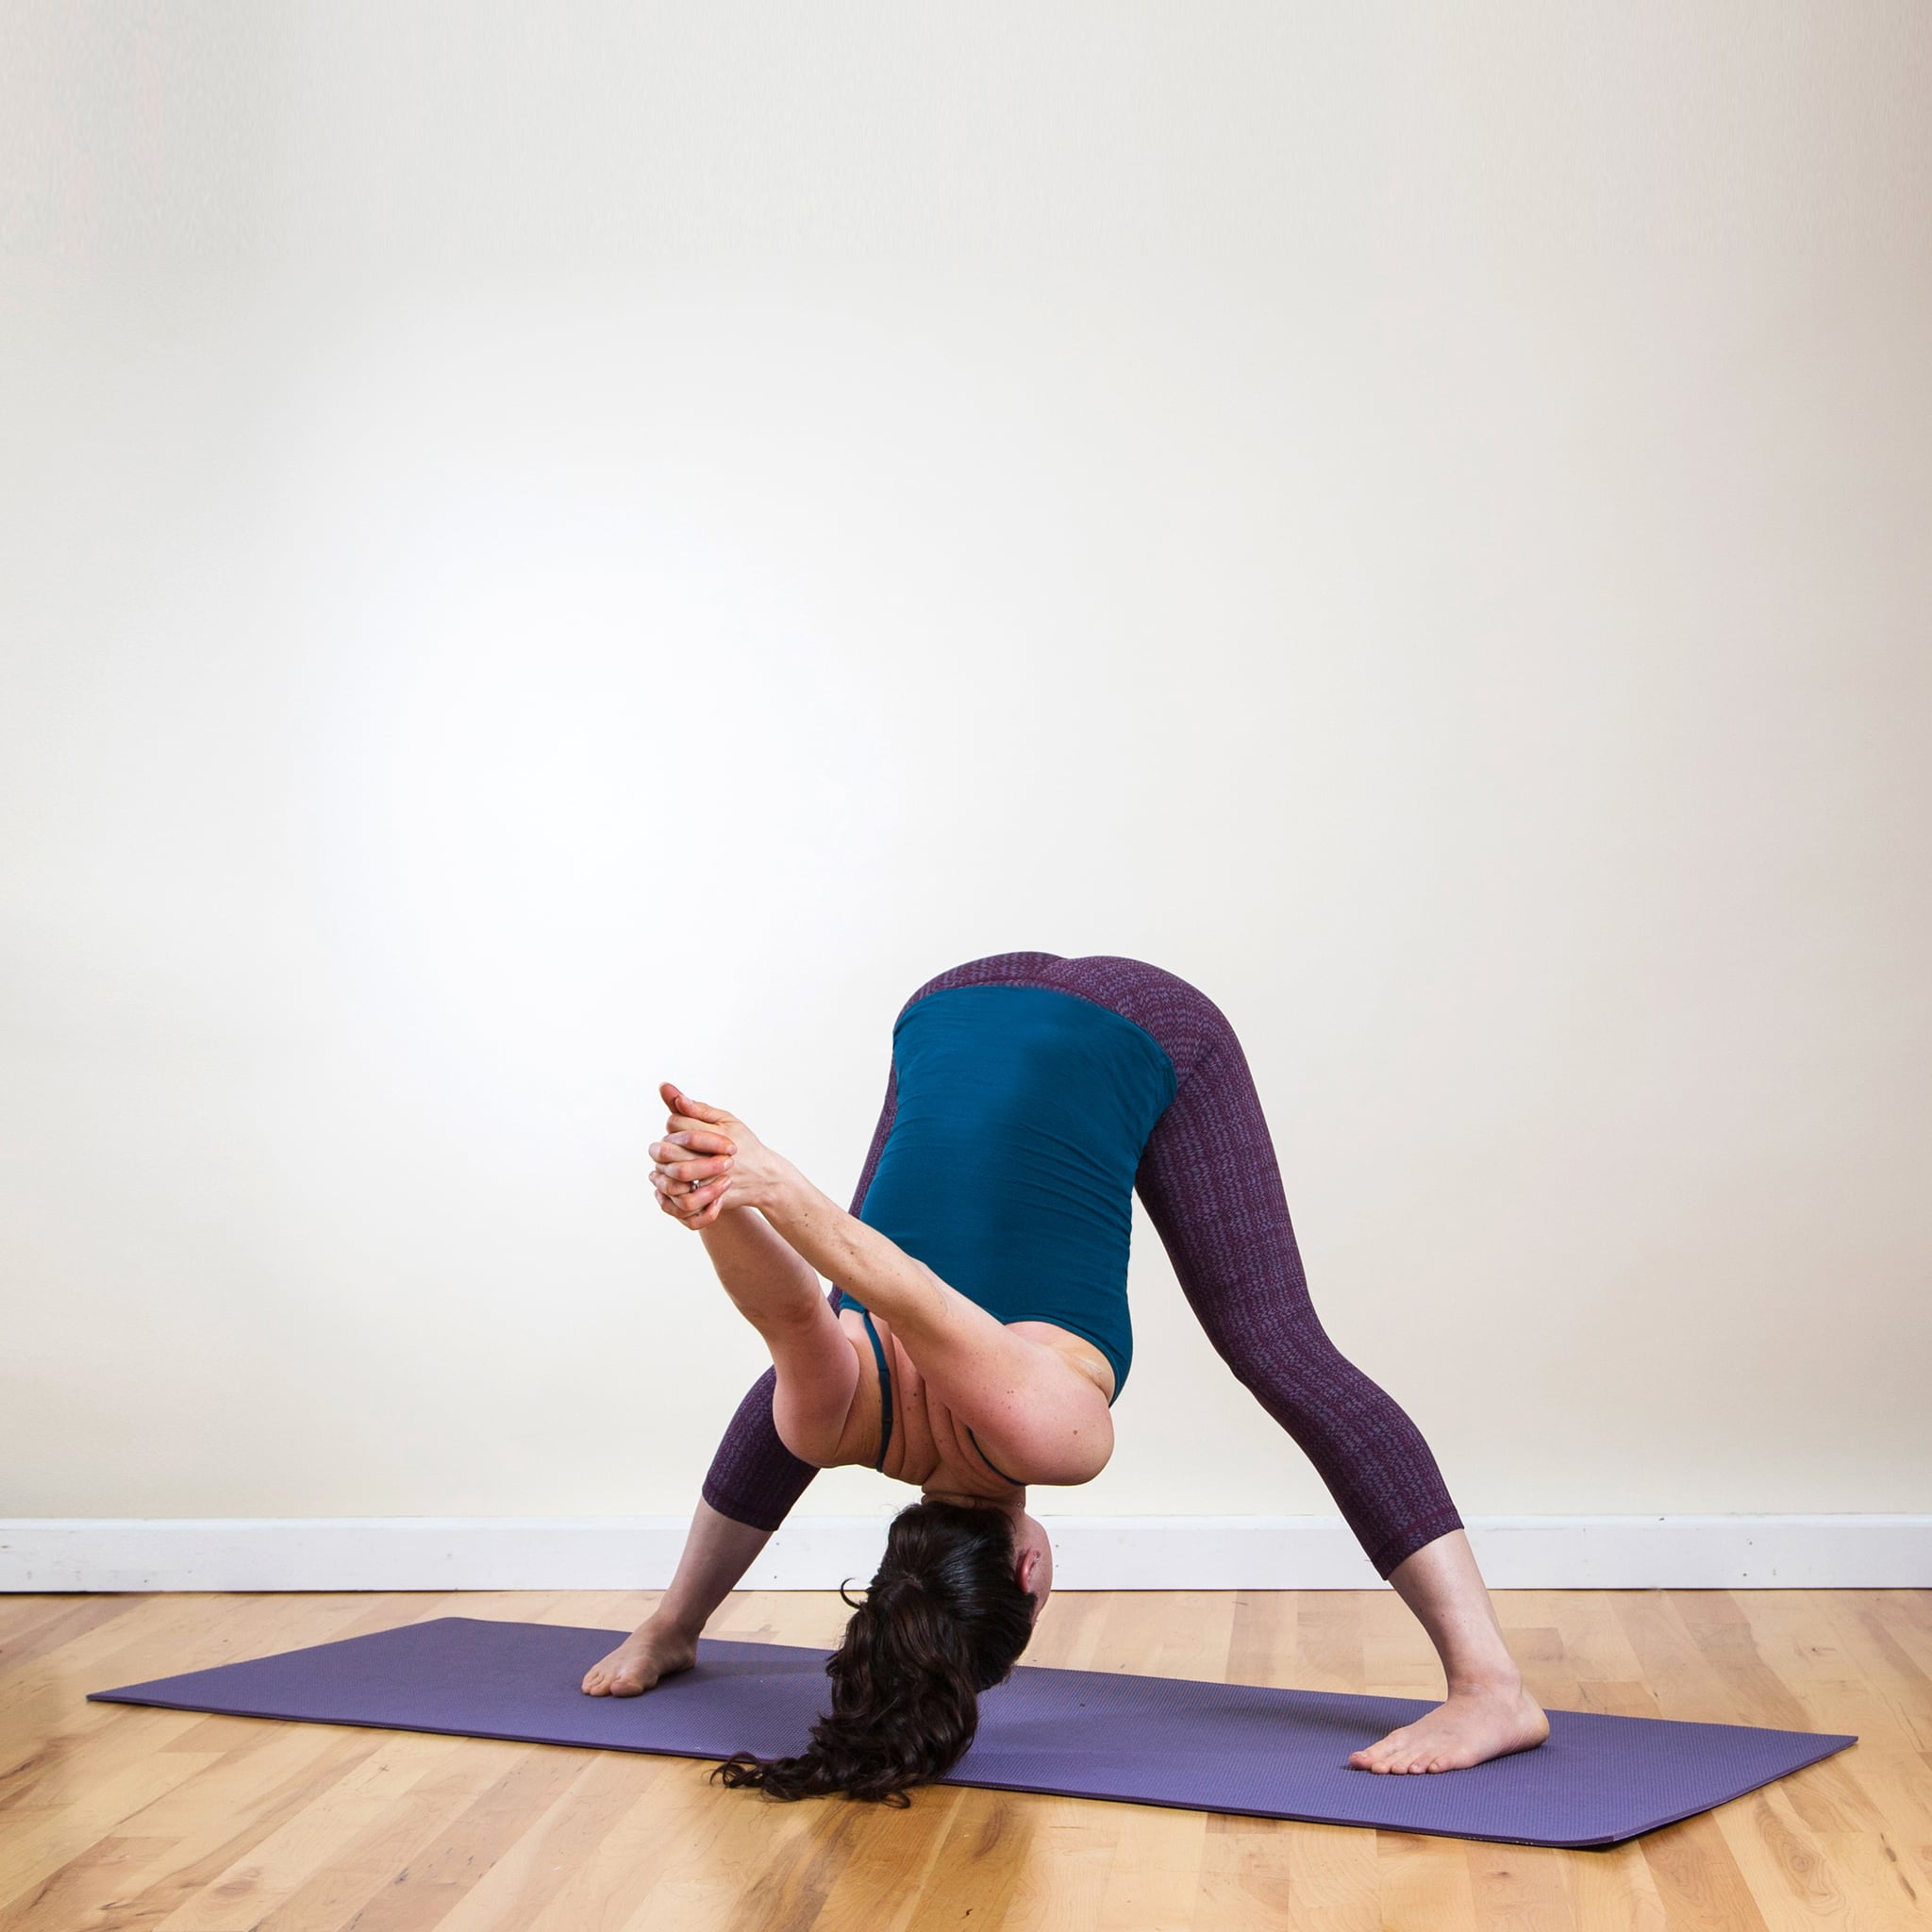 Wide Legged Forward Bend Pose Energize Your Body And Brain With This